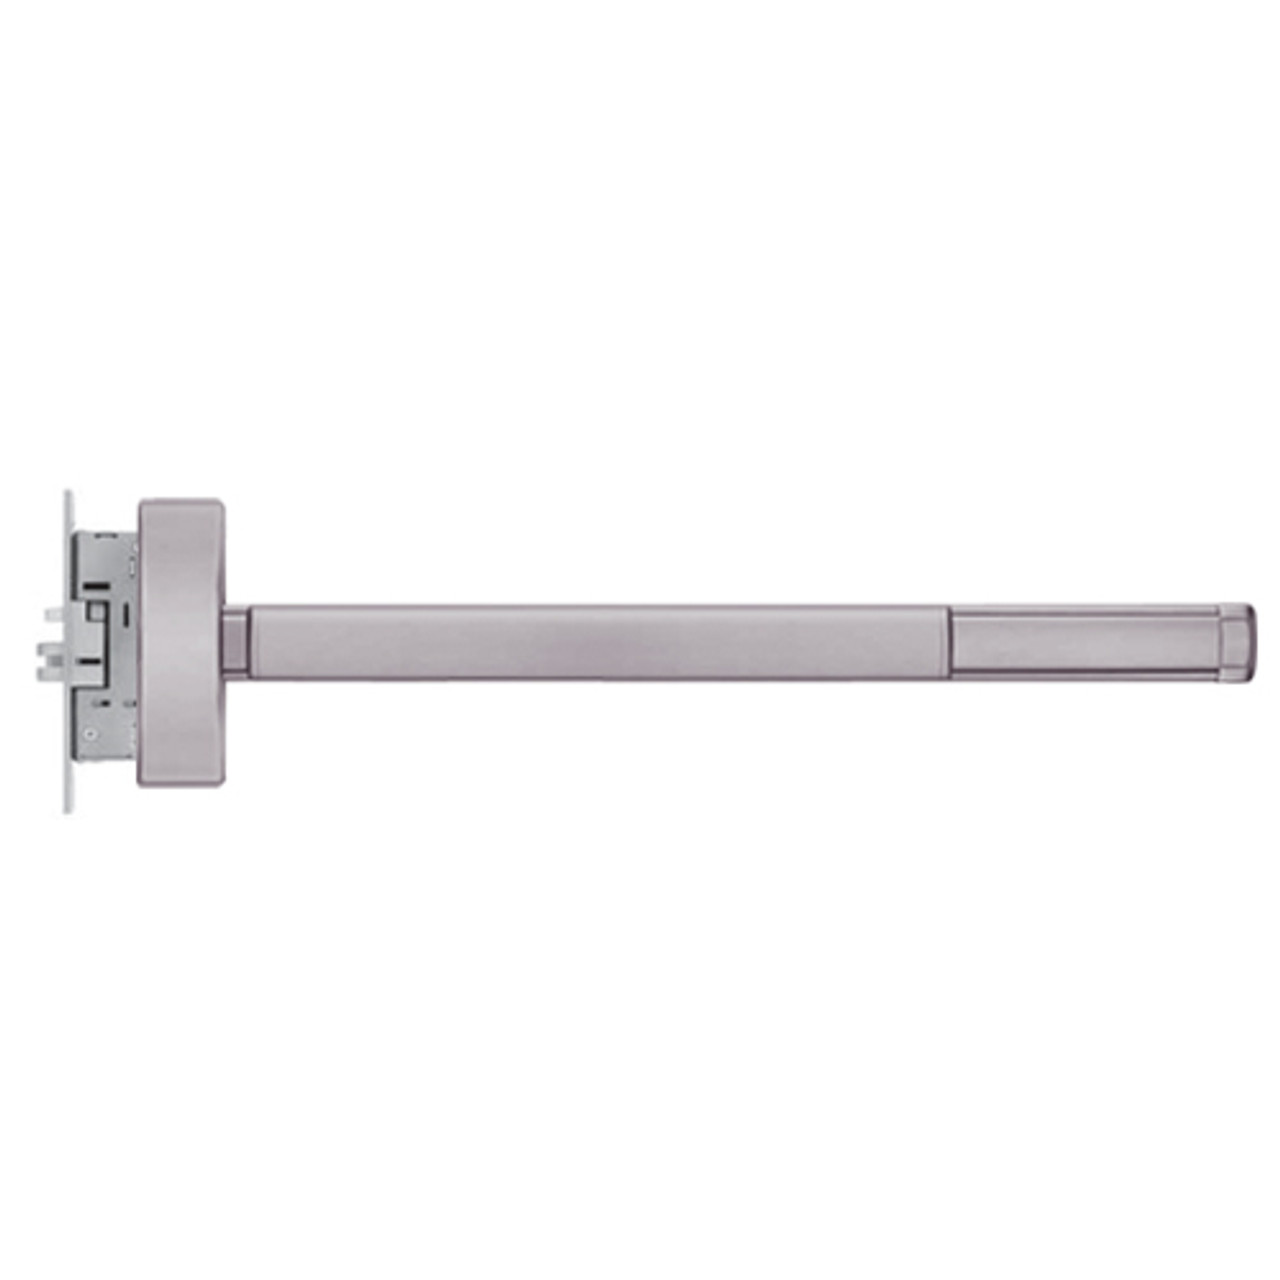 MLRFL2308-RHR-630-48 PHI 2300 Series Fire Rated Apex Mortise Exit Device with Motorized Latch Retraction Prepped for Key Controls Lever/Knob in Satin Stainless Steel Finish